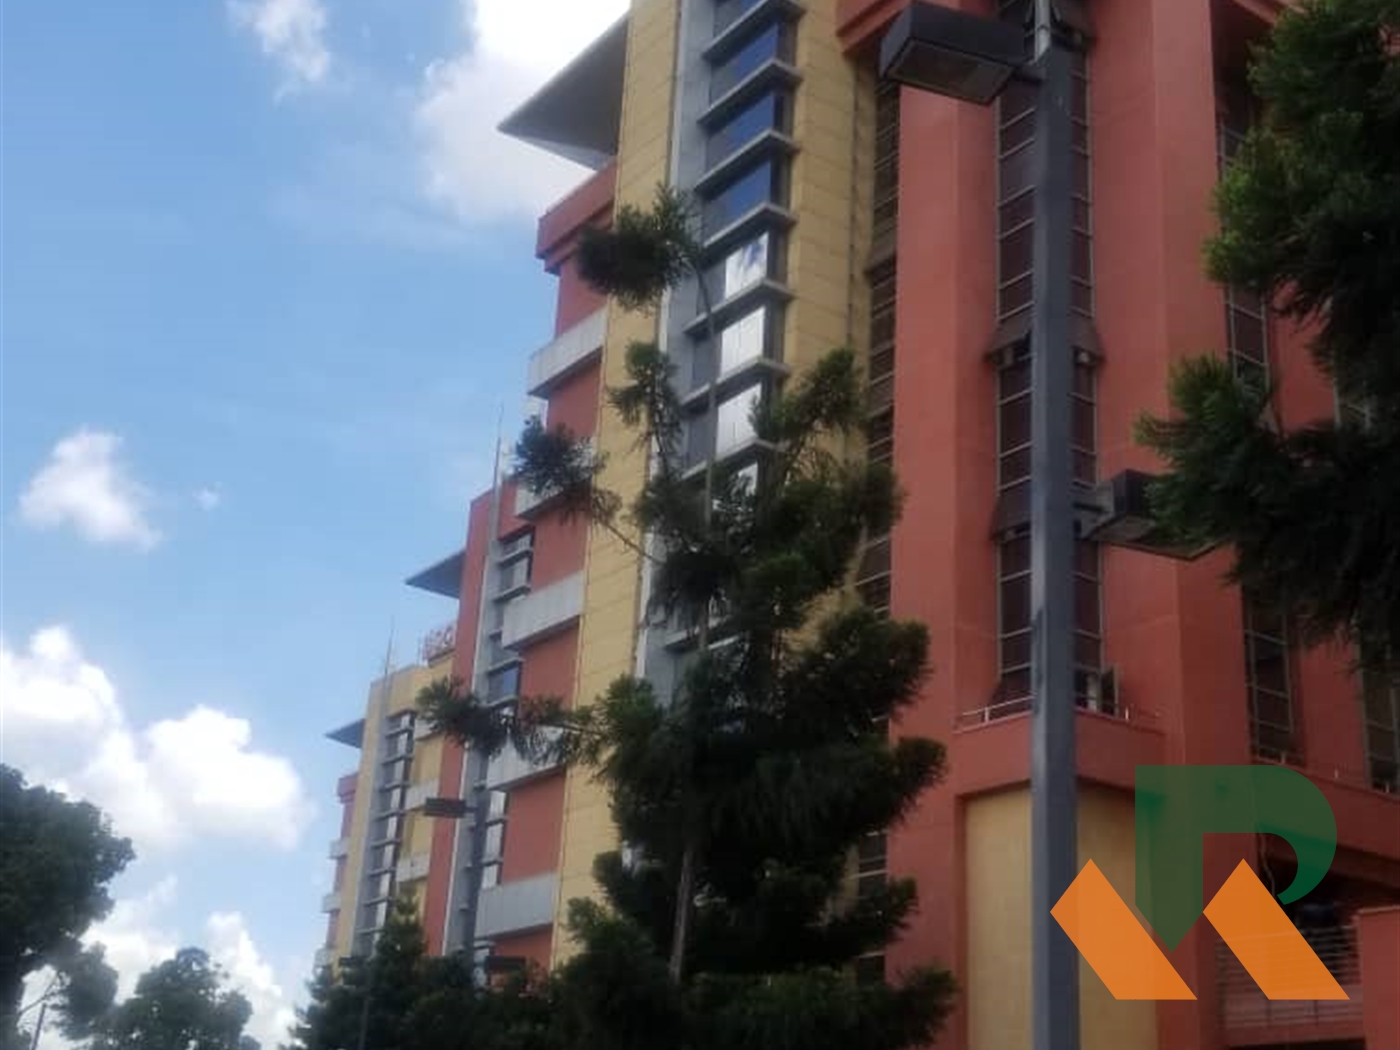 Office Space for rent in Nakawa Kampala